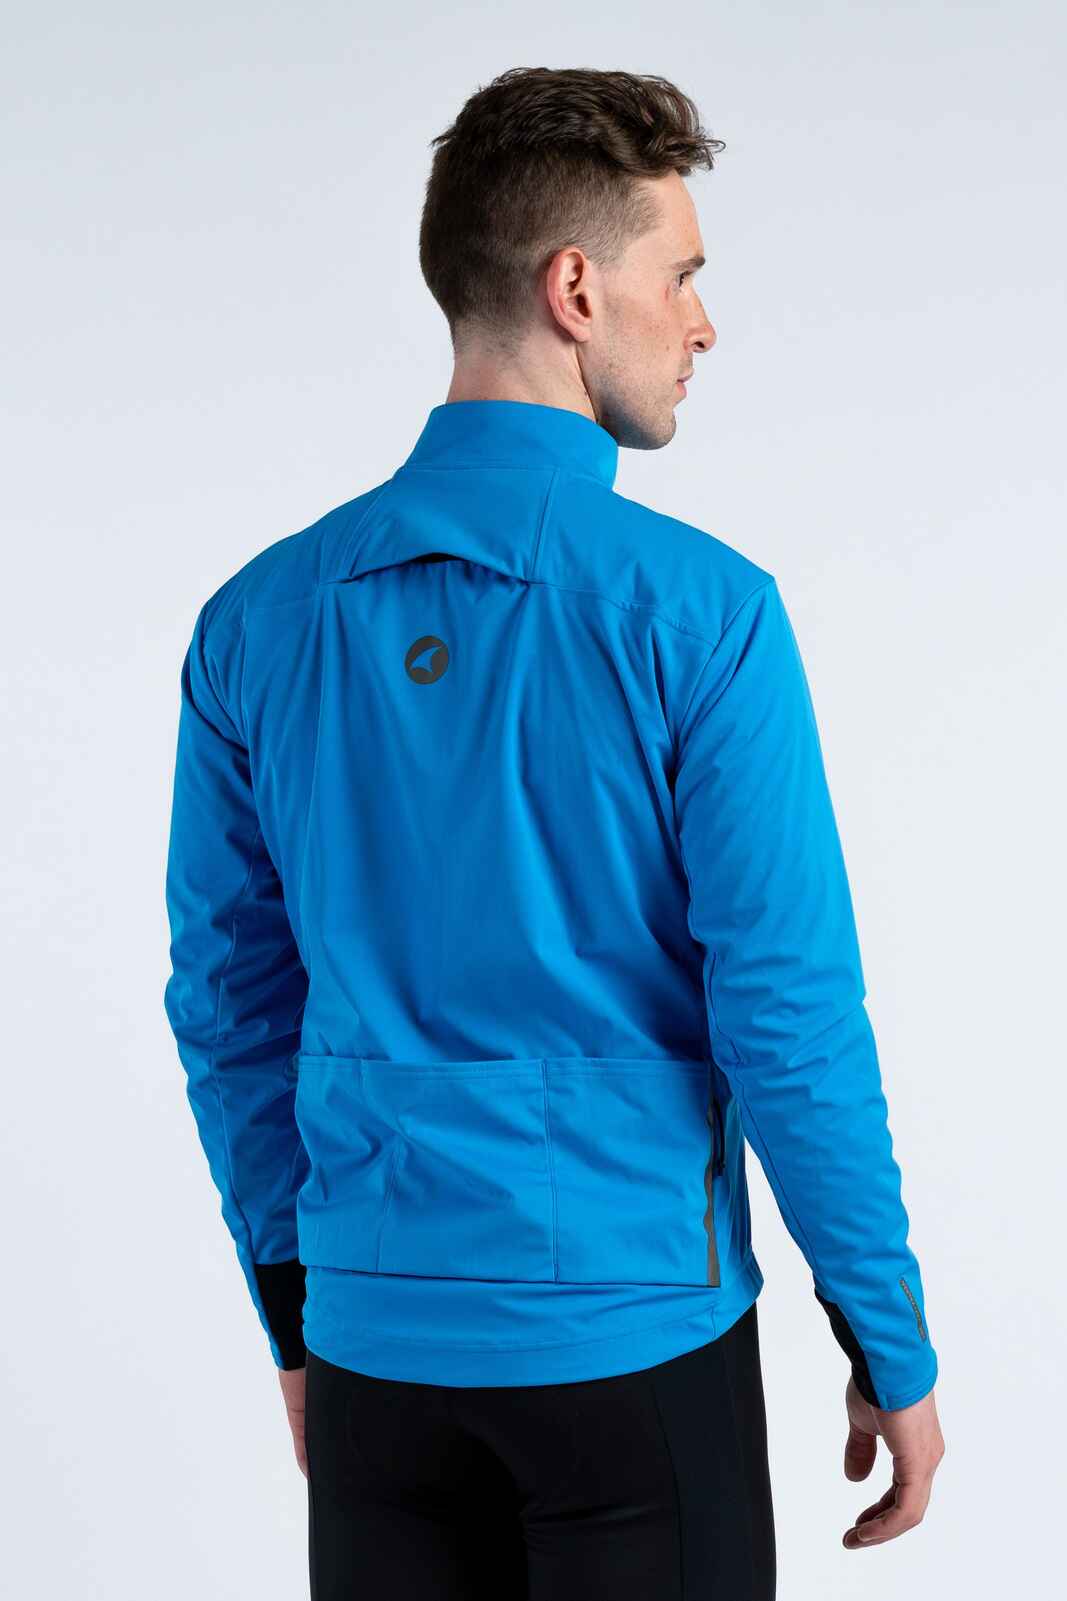 Men's Blue Winter Cycling Jacket - Back View